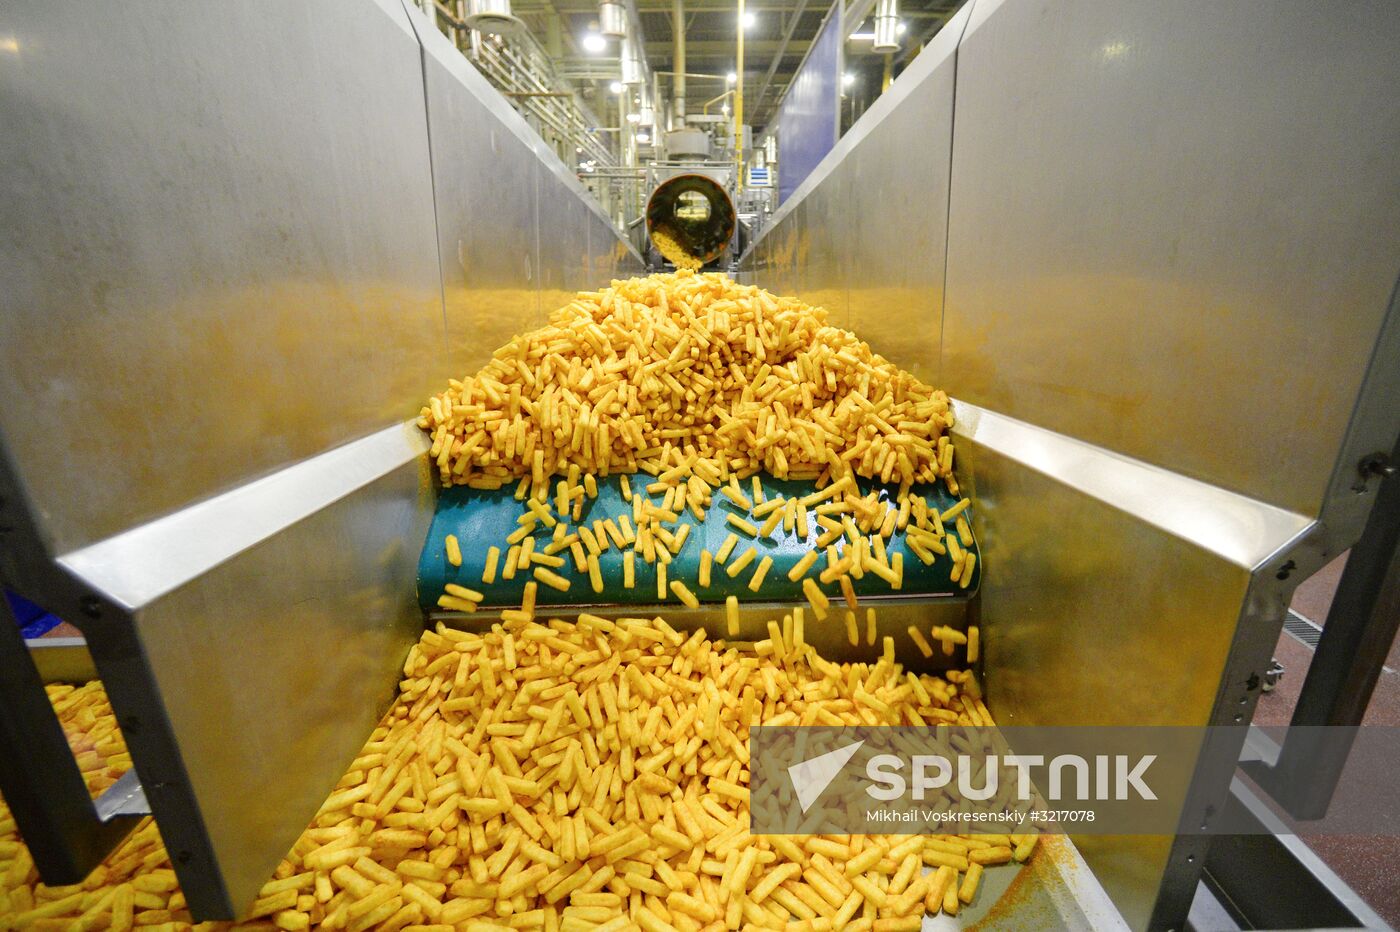 New snack production line opens at PepsiCo plant